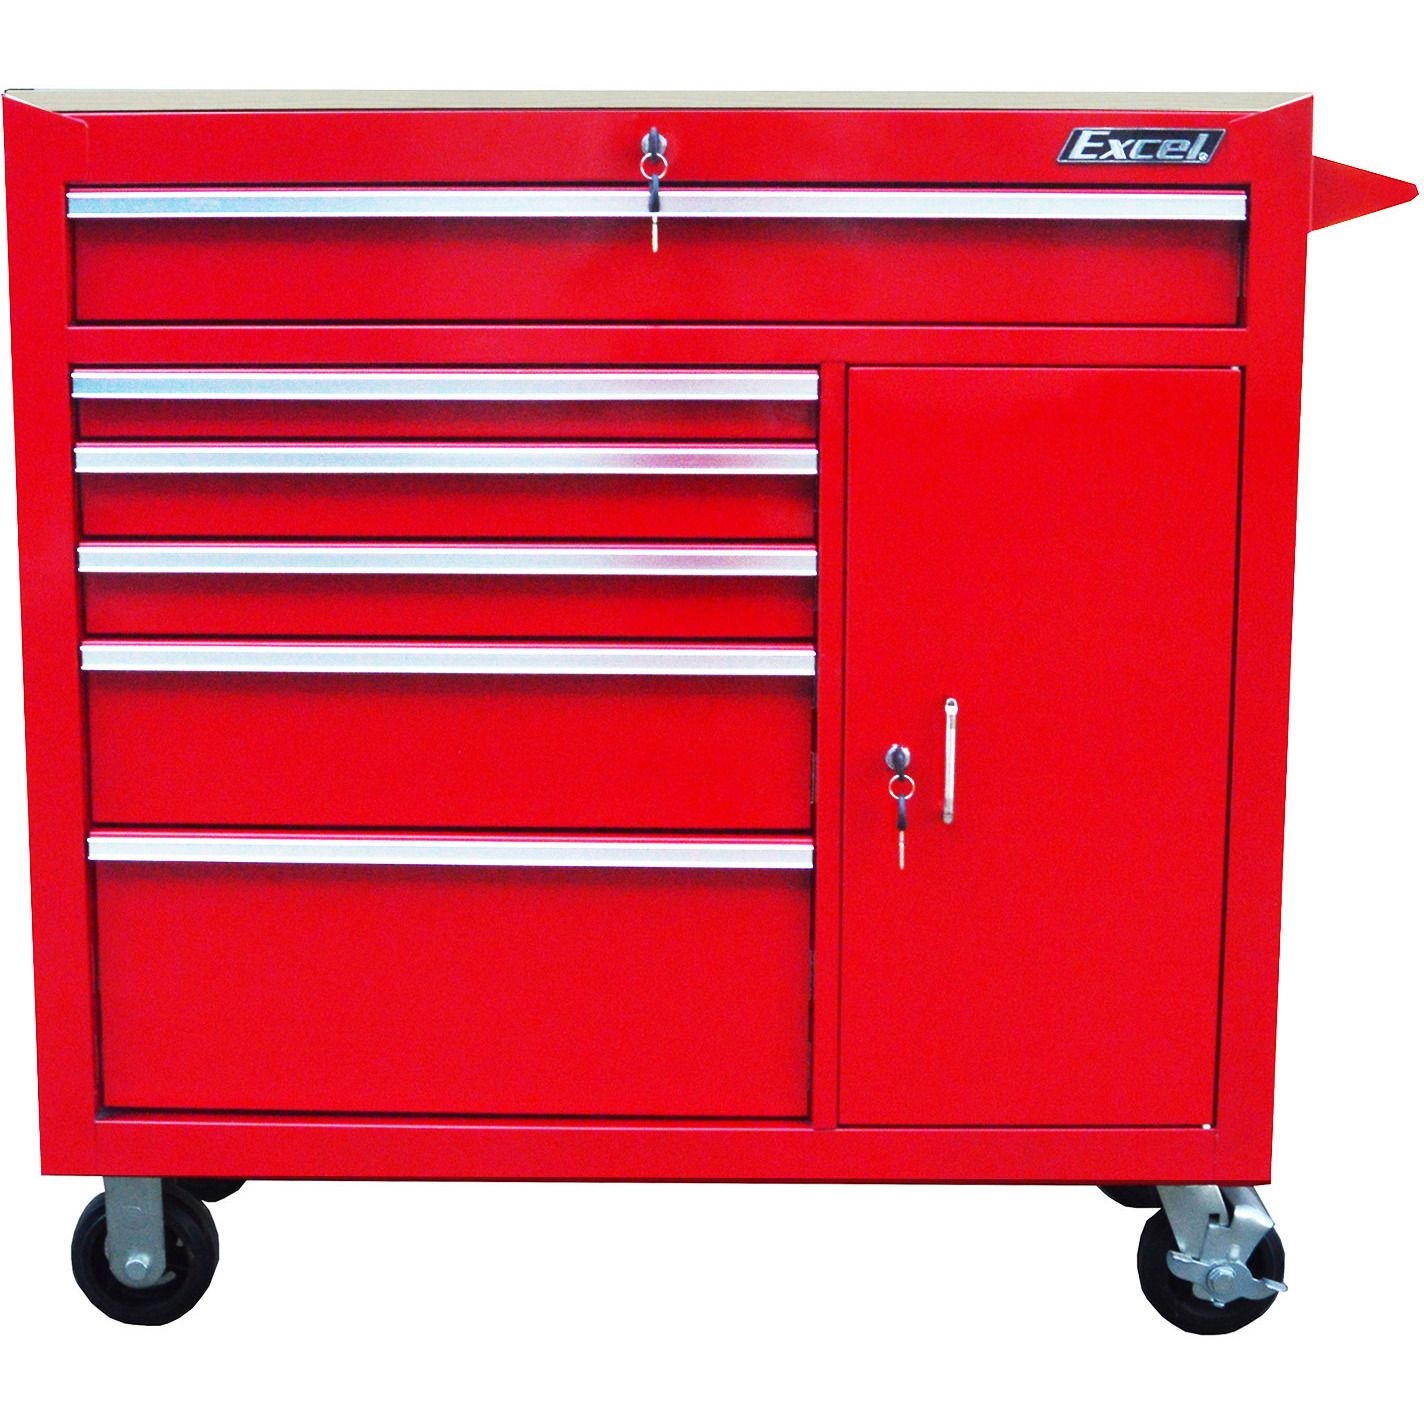 Horme Hd 6 Drawers 1 Compartment Tool Cabinet Tbr4108x Tool